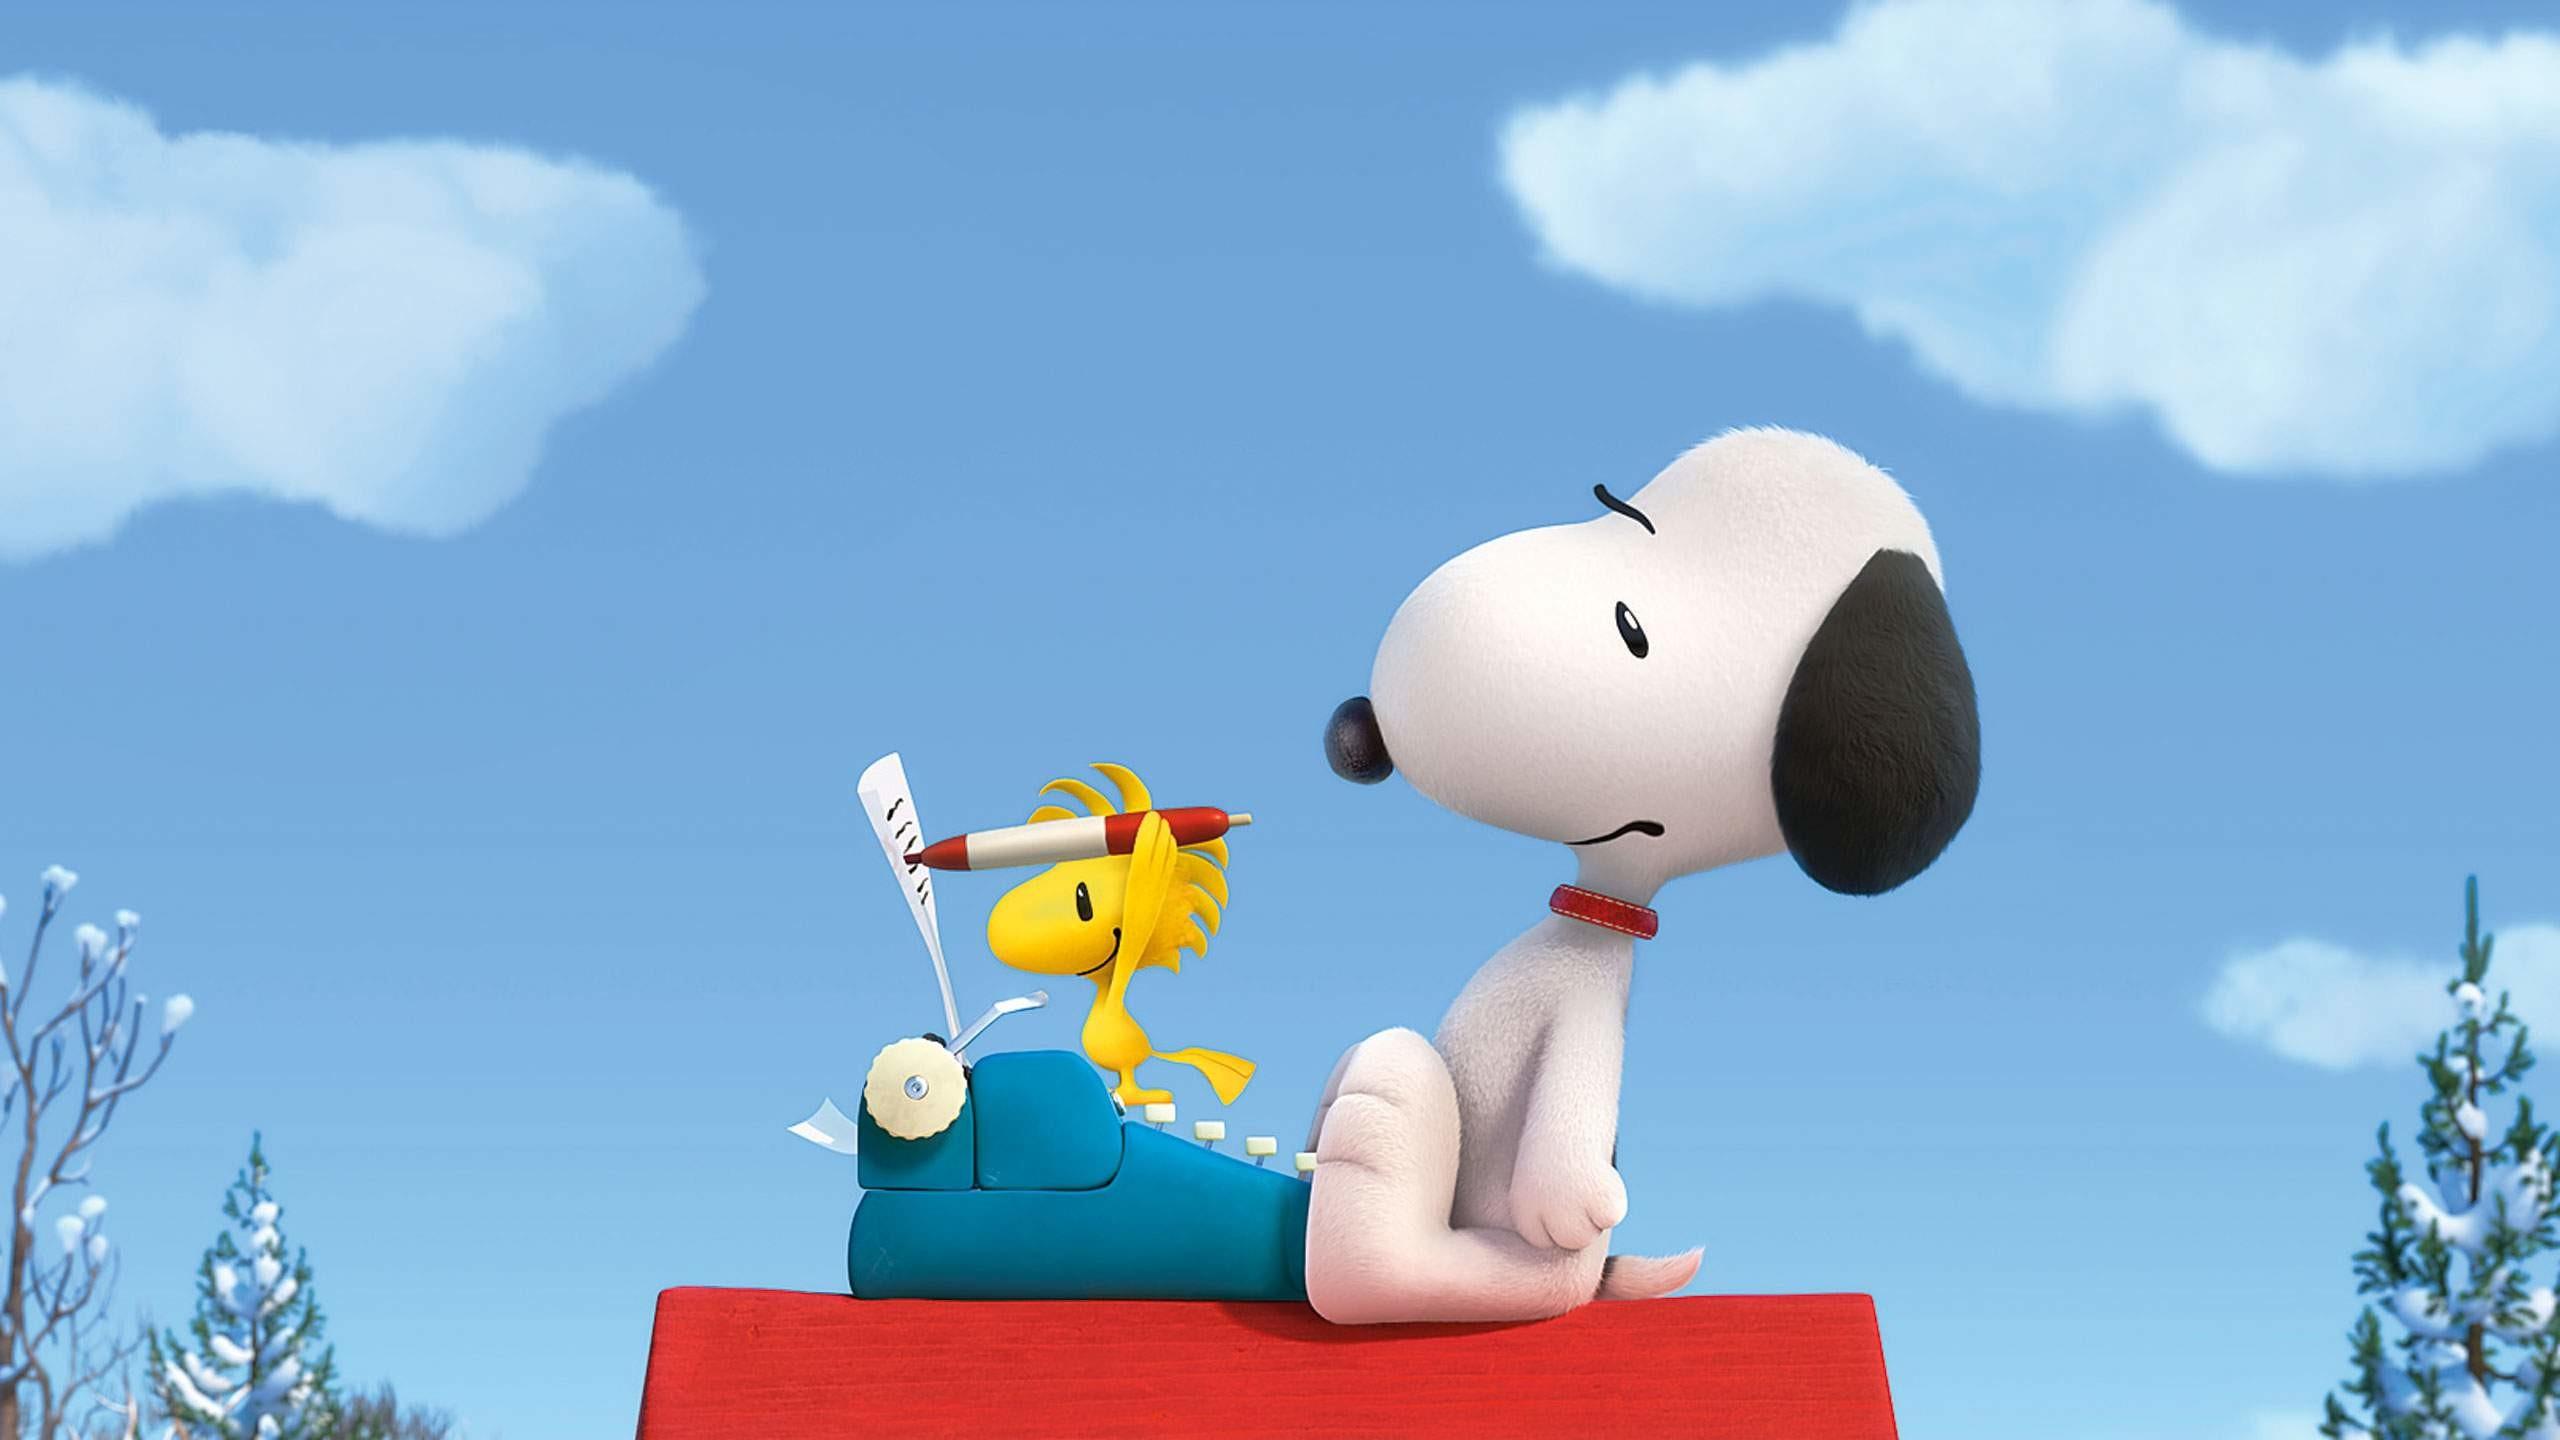 Snoopy Wallpapers Wallpaper Cave